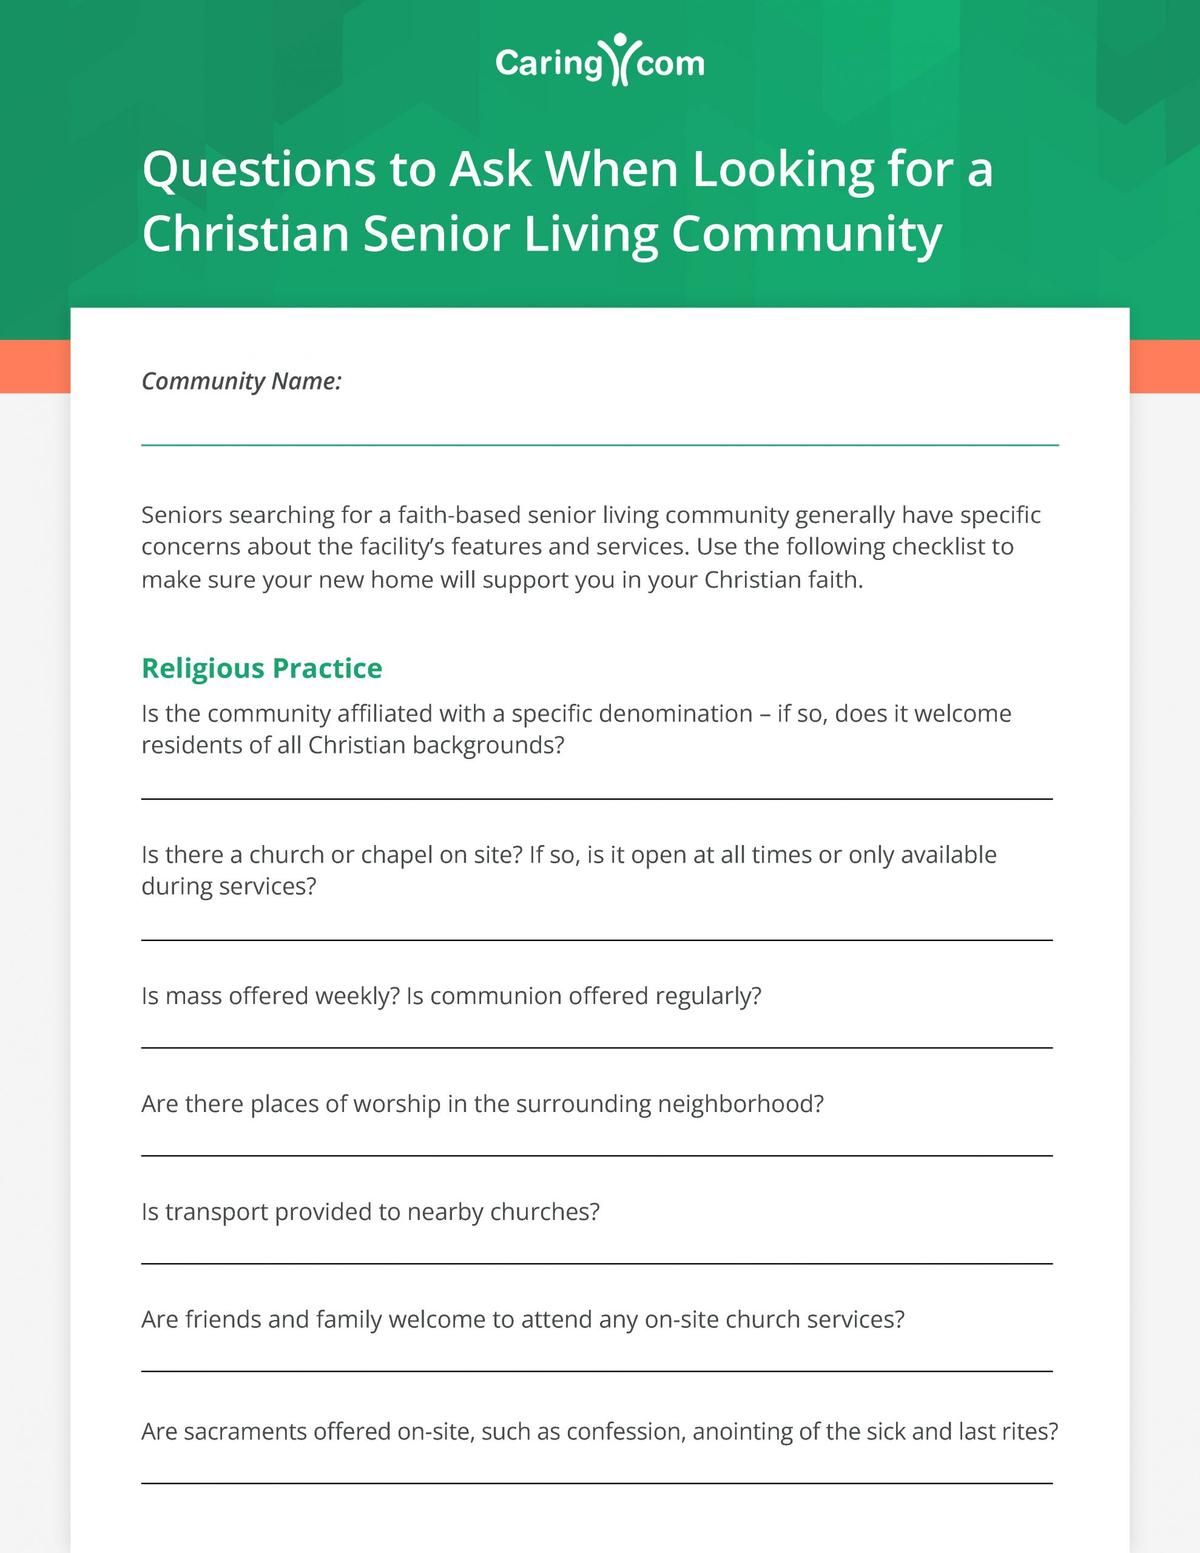 Questions to Ask When Looking for a Christian Senior Living Community